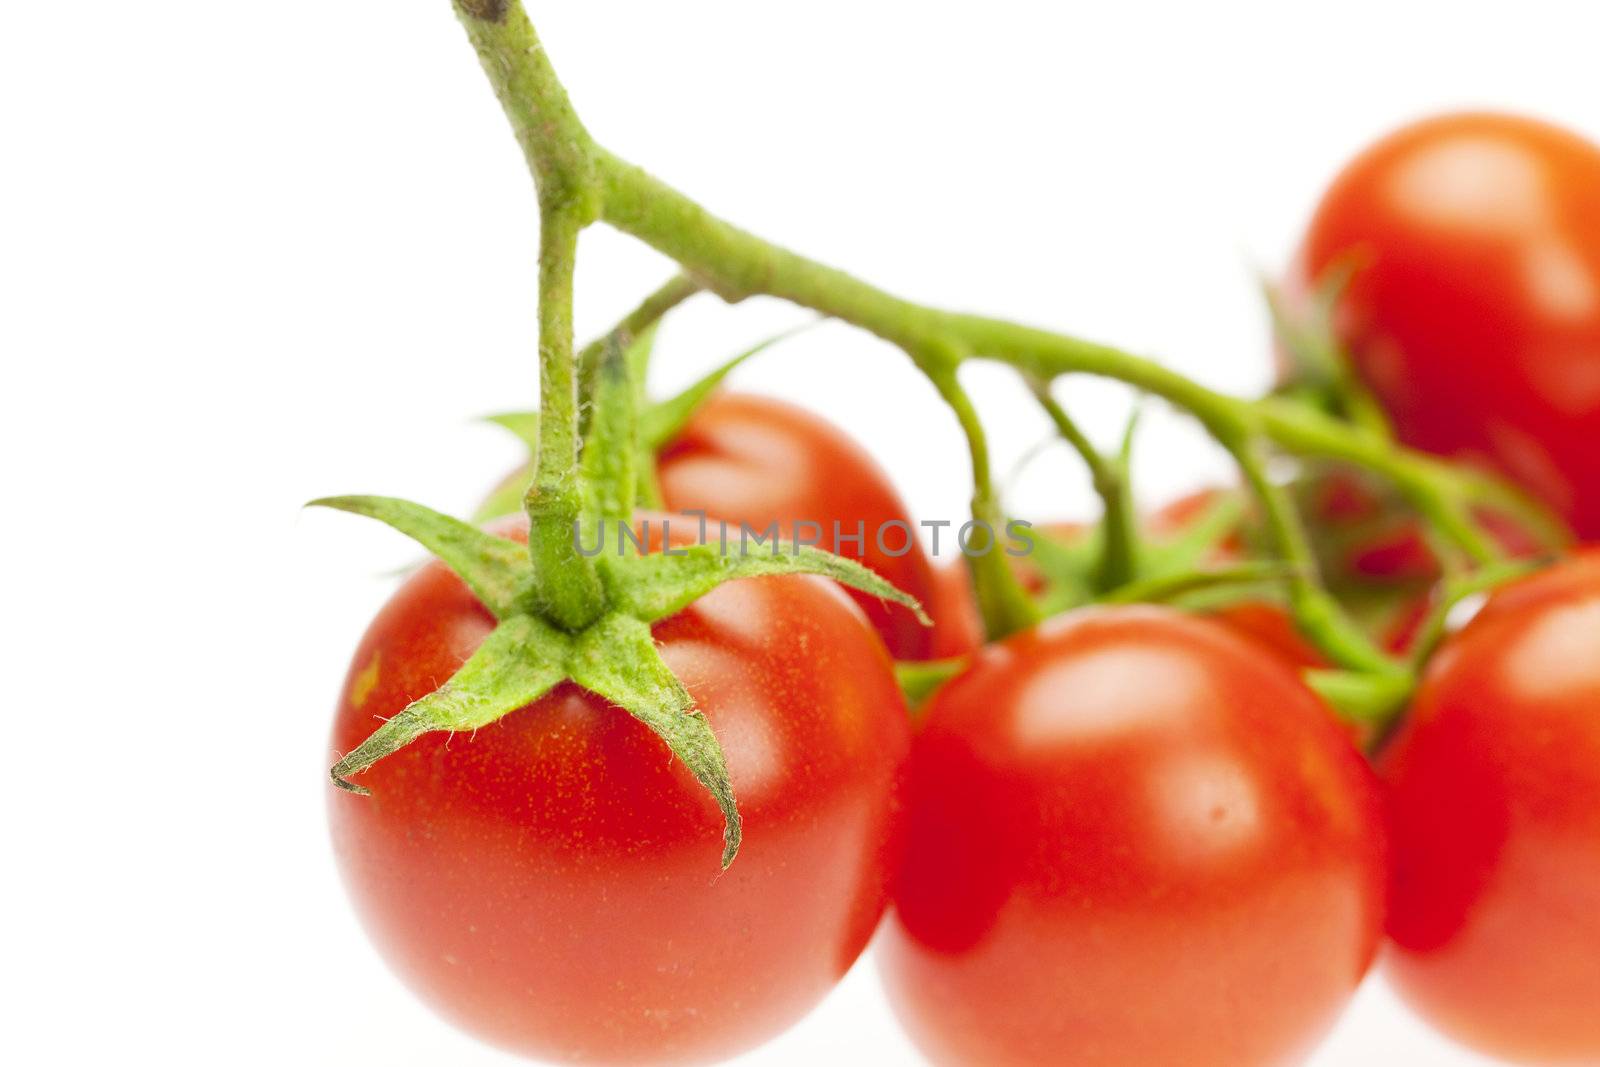 juicy tomatoes isolated on white